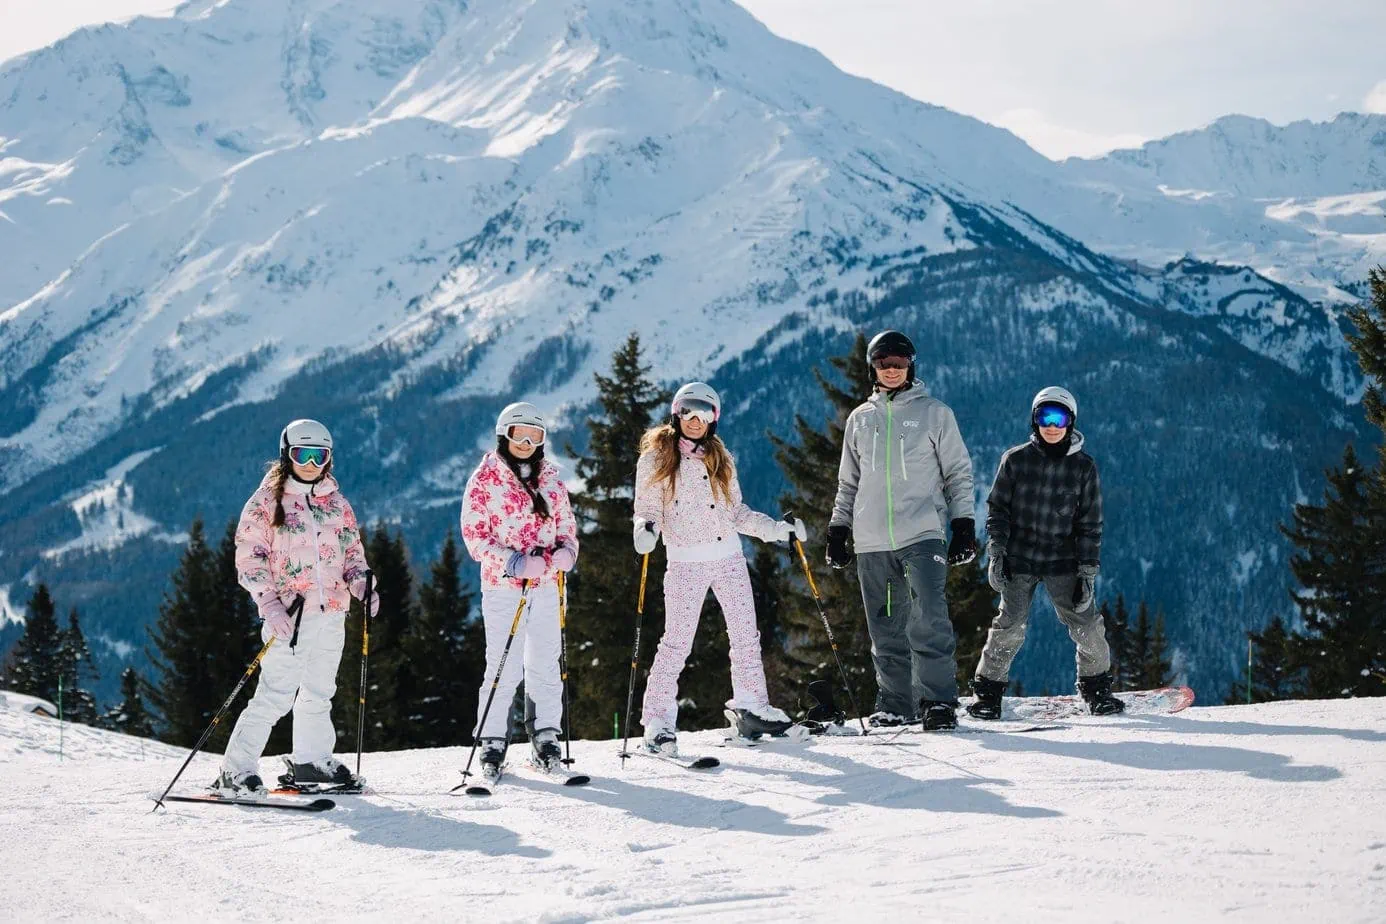 Family skiing in cute outfits with scenic mountain views